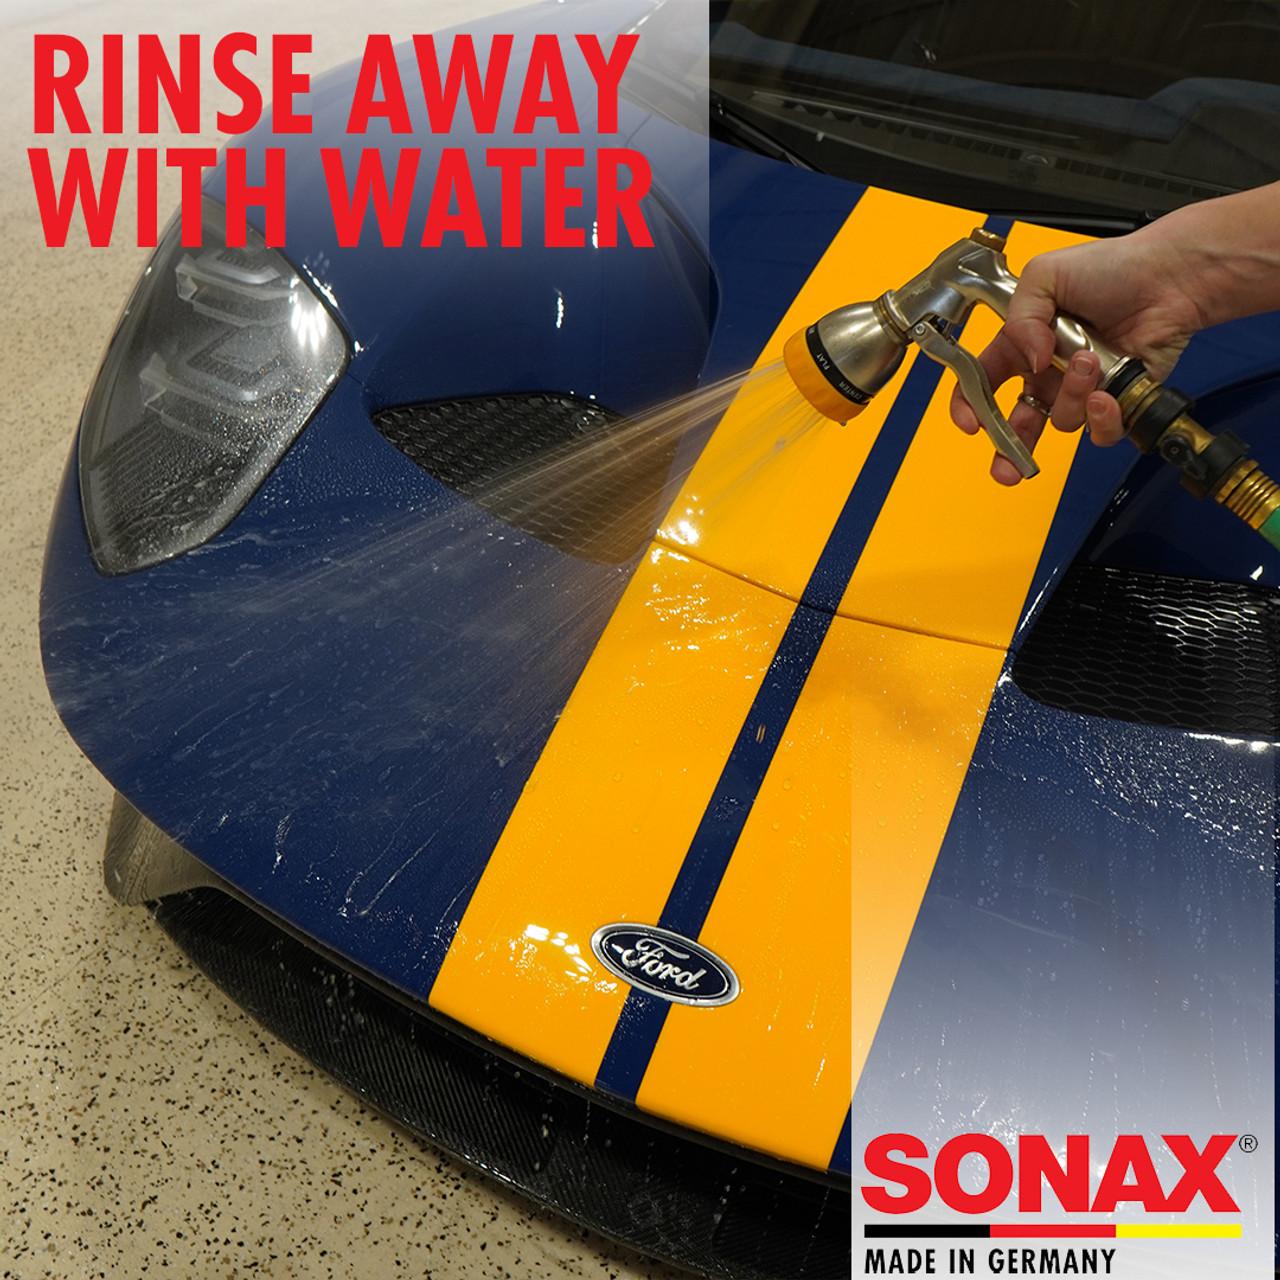 SONAX Spray and Seal